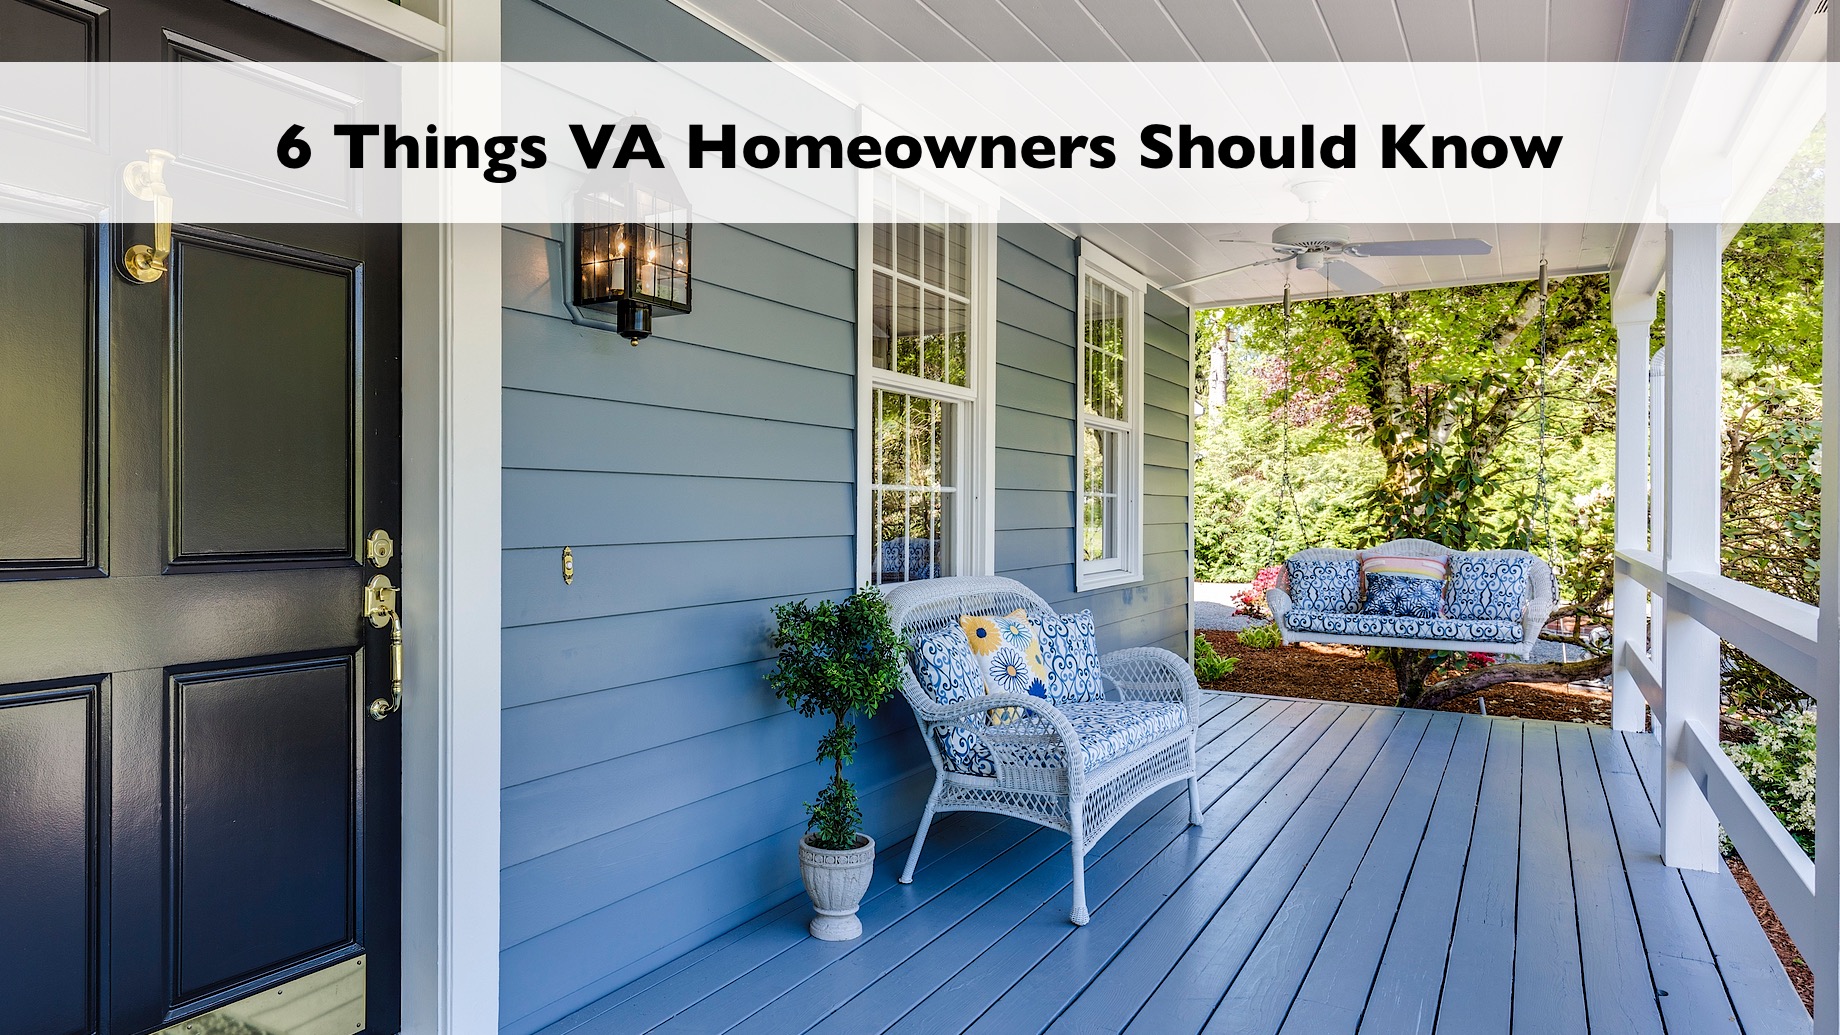 6 Things VA Homeowners Should Know